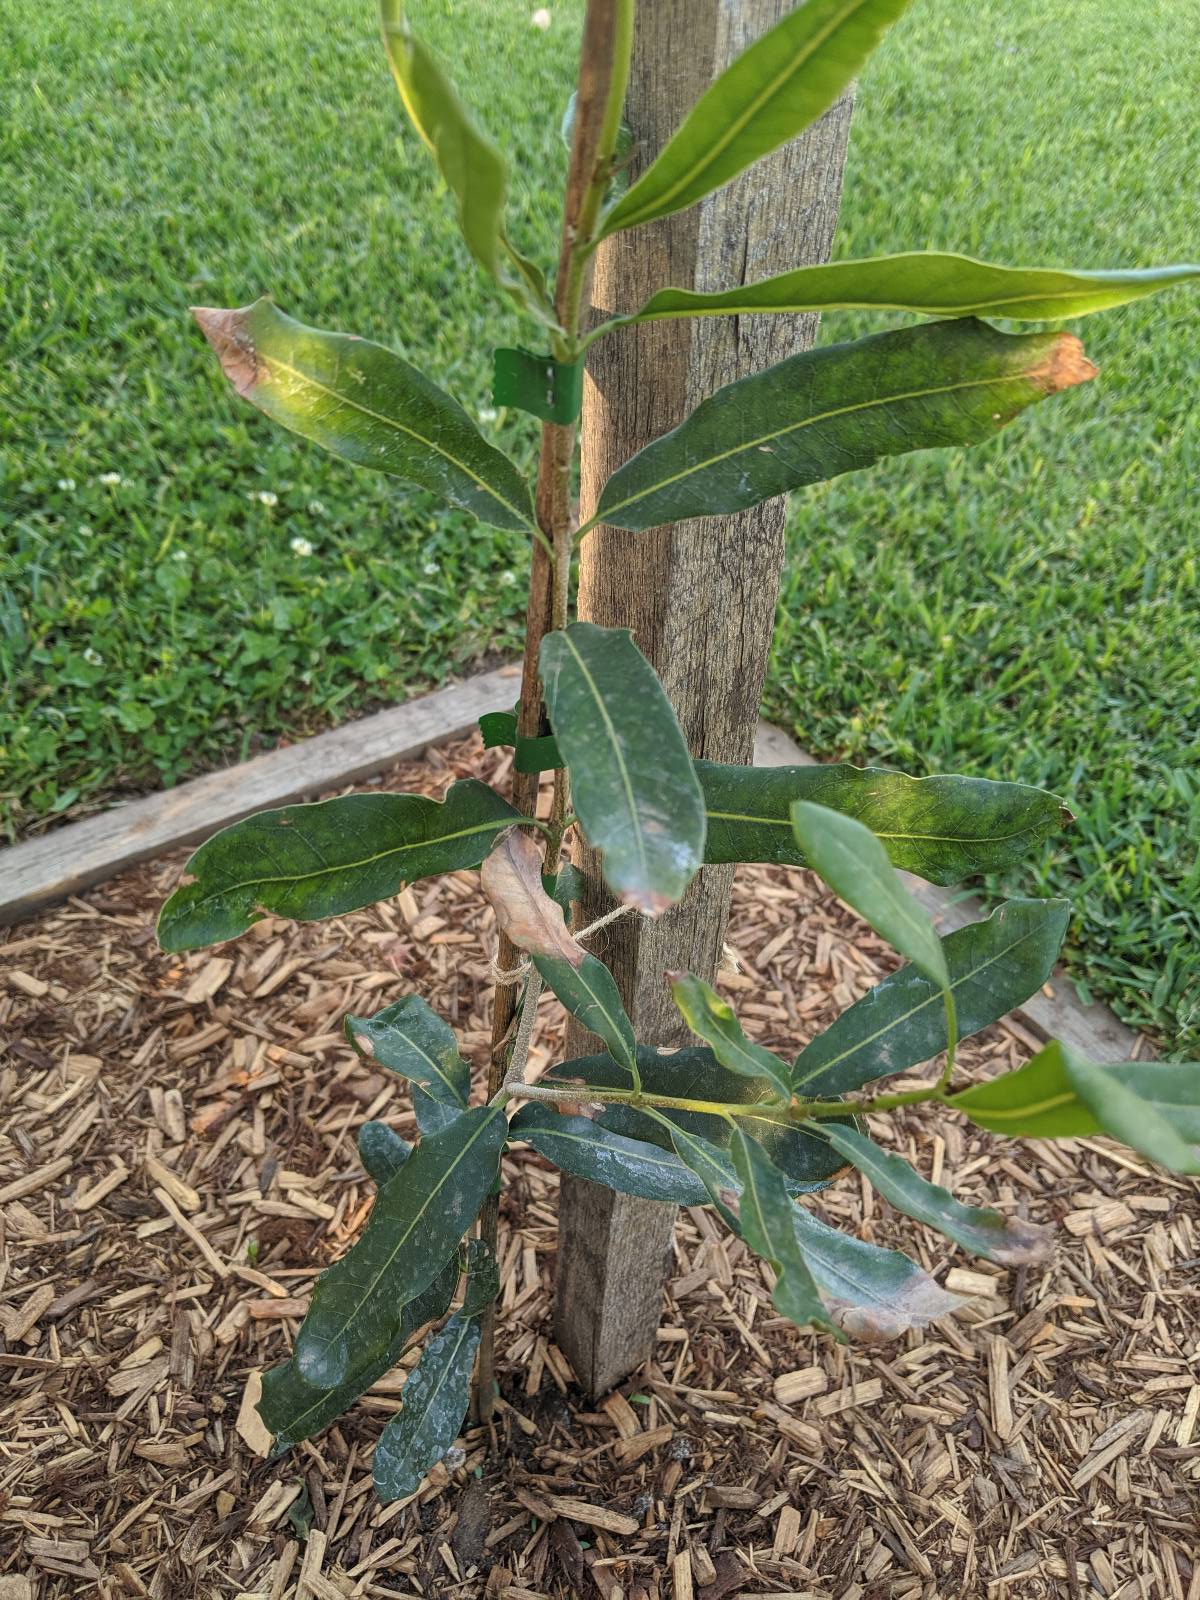 What's wrong with my macadamia tree